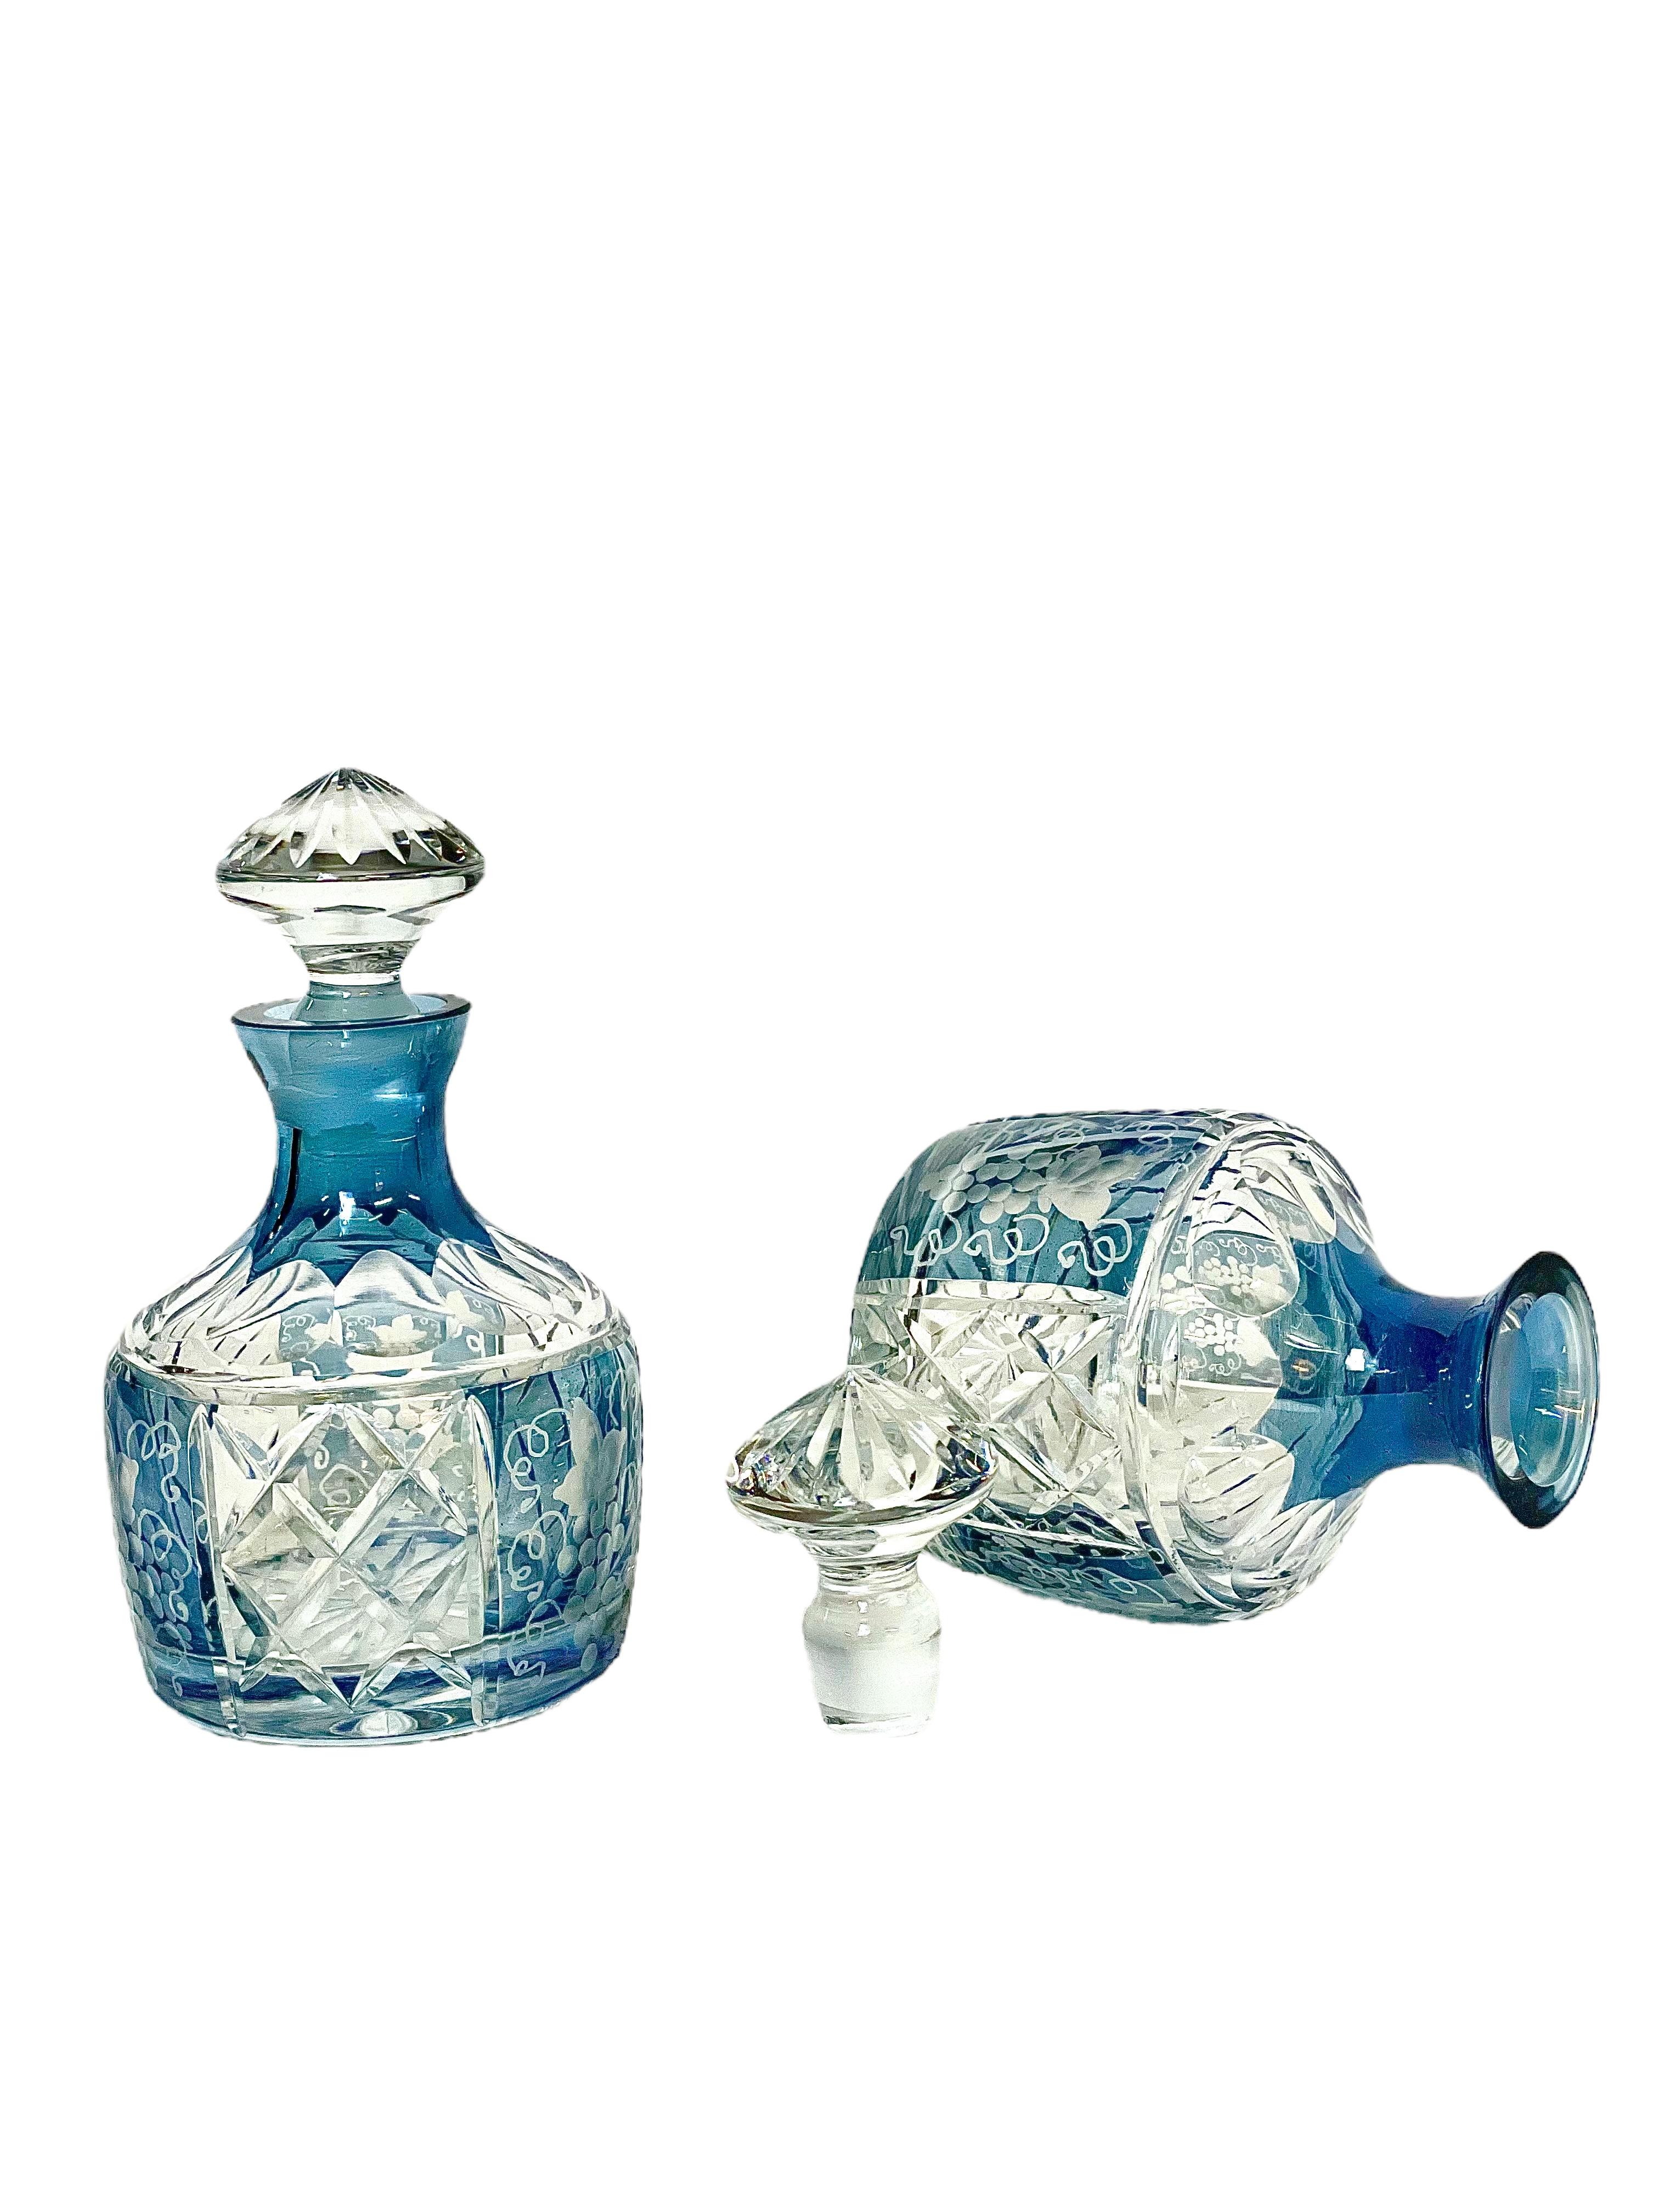 A pair of pretty little cut crystal 'Flacons' with stoppers, in grey cut to clear. The body of the bottles have a beautifully engraved design of vine leaves and grapes interspersed with panels of large diamond shapes. The base and stoppers are both